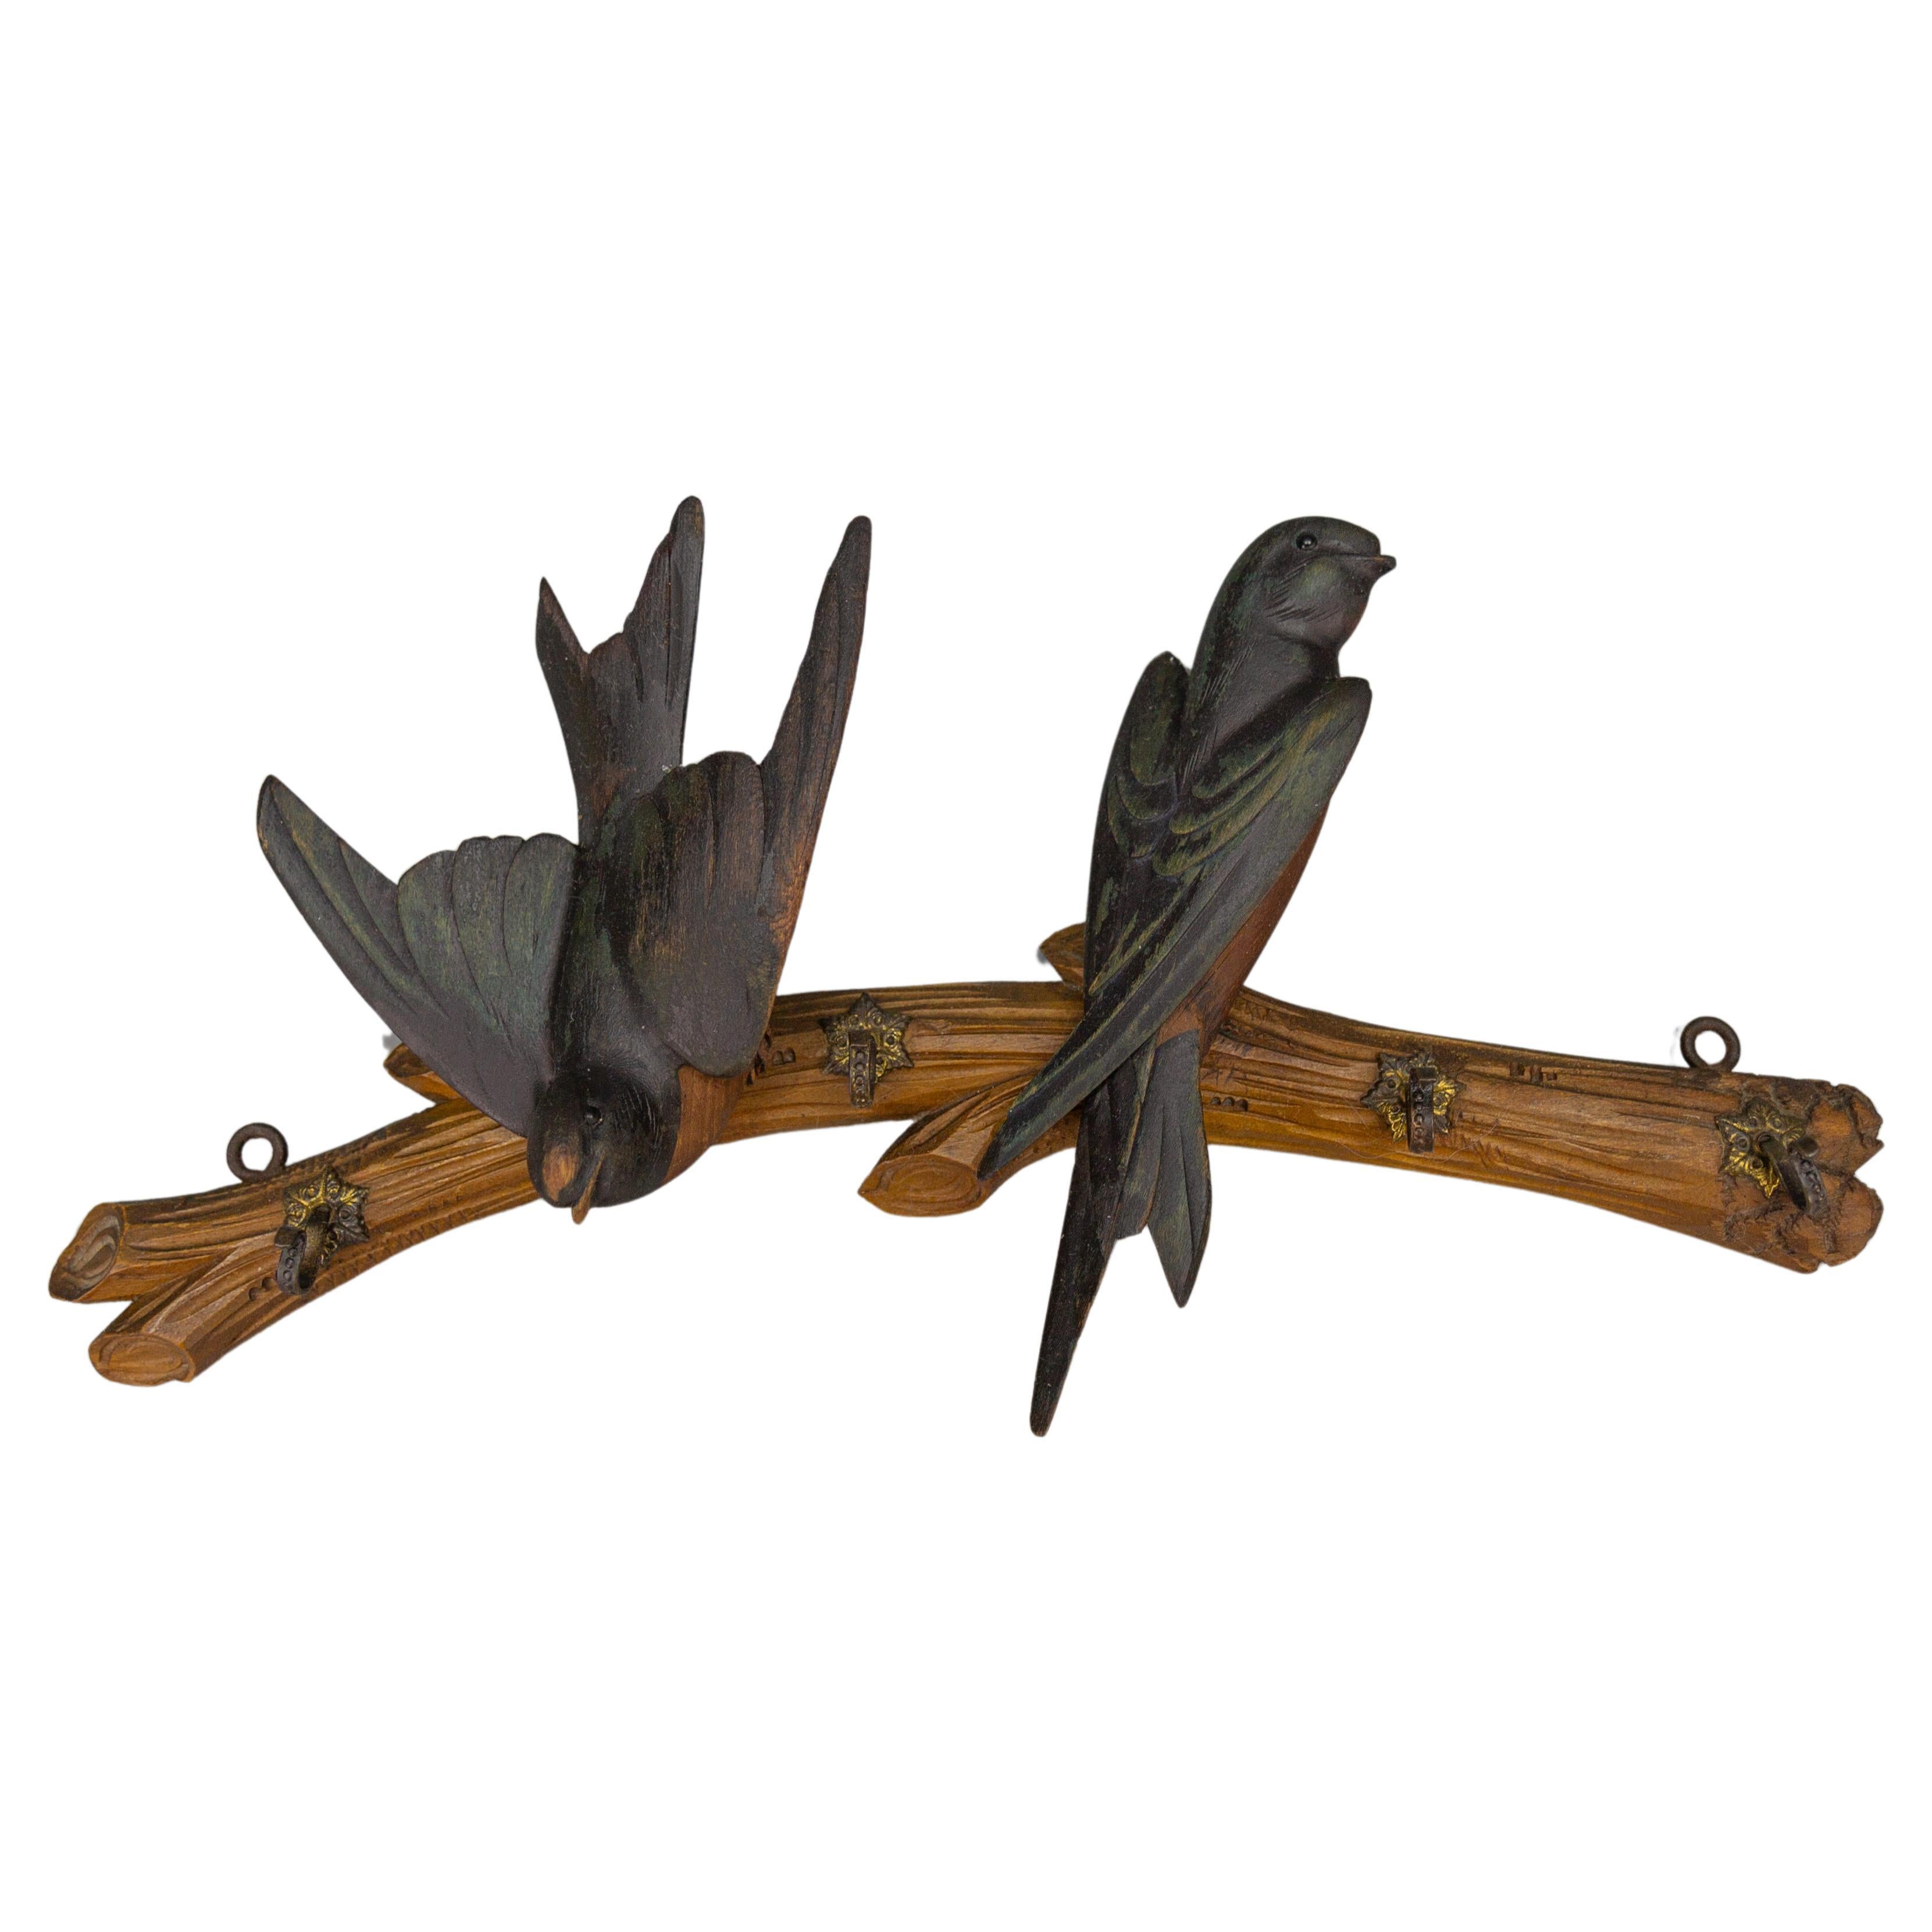 Antique German Black Forest Wood Carving Swallows Key Holder, Early 20th Century